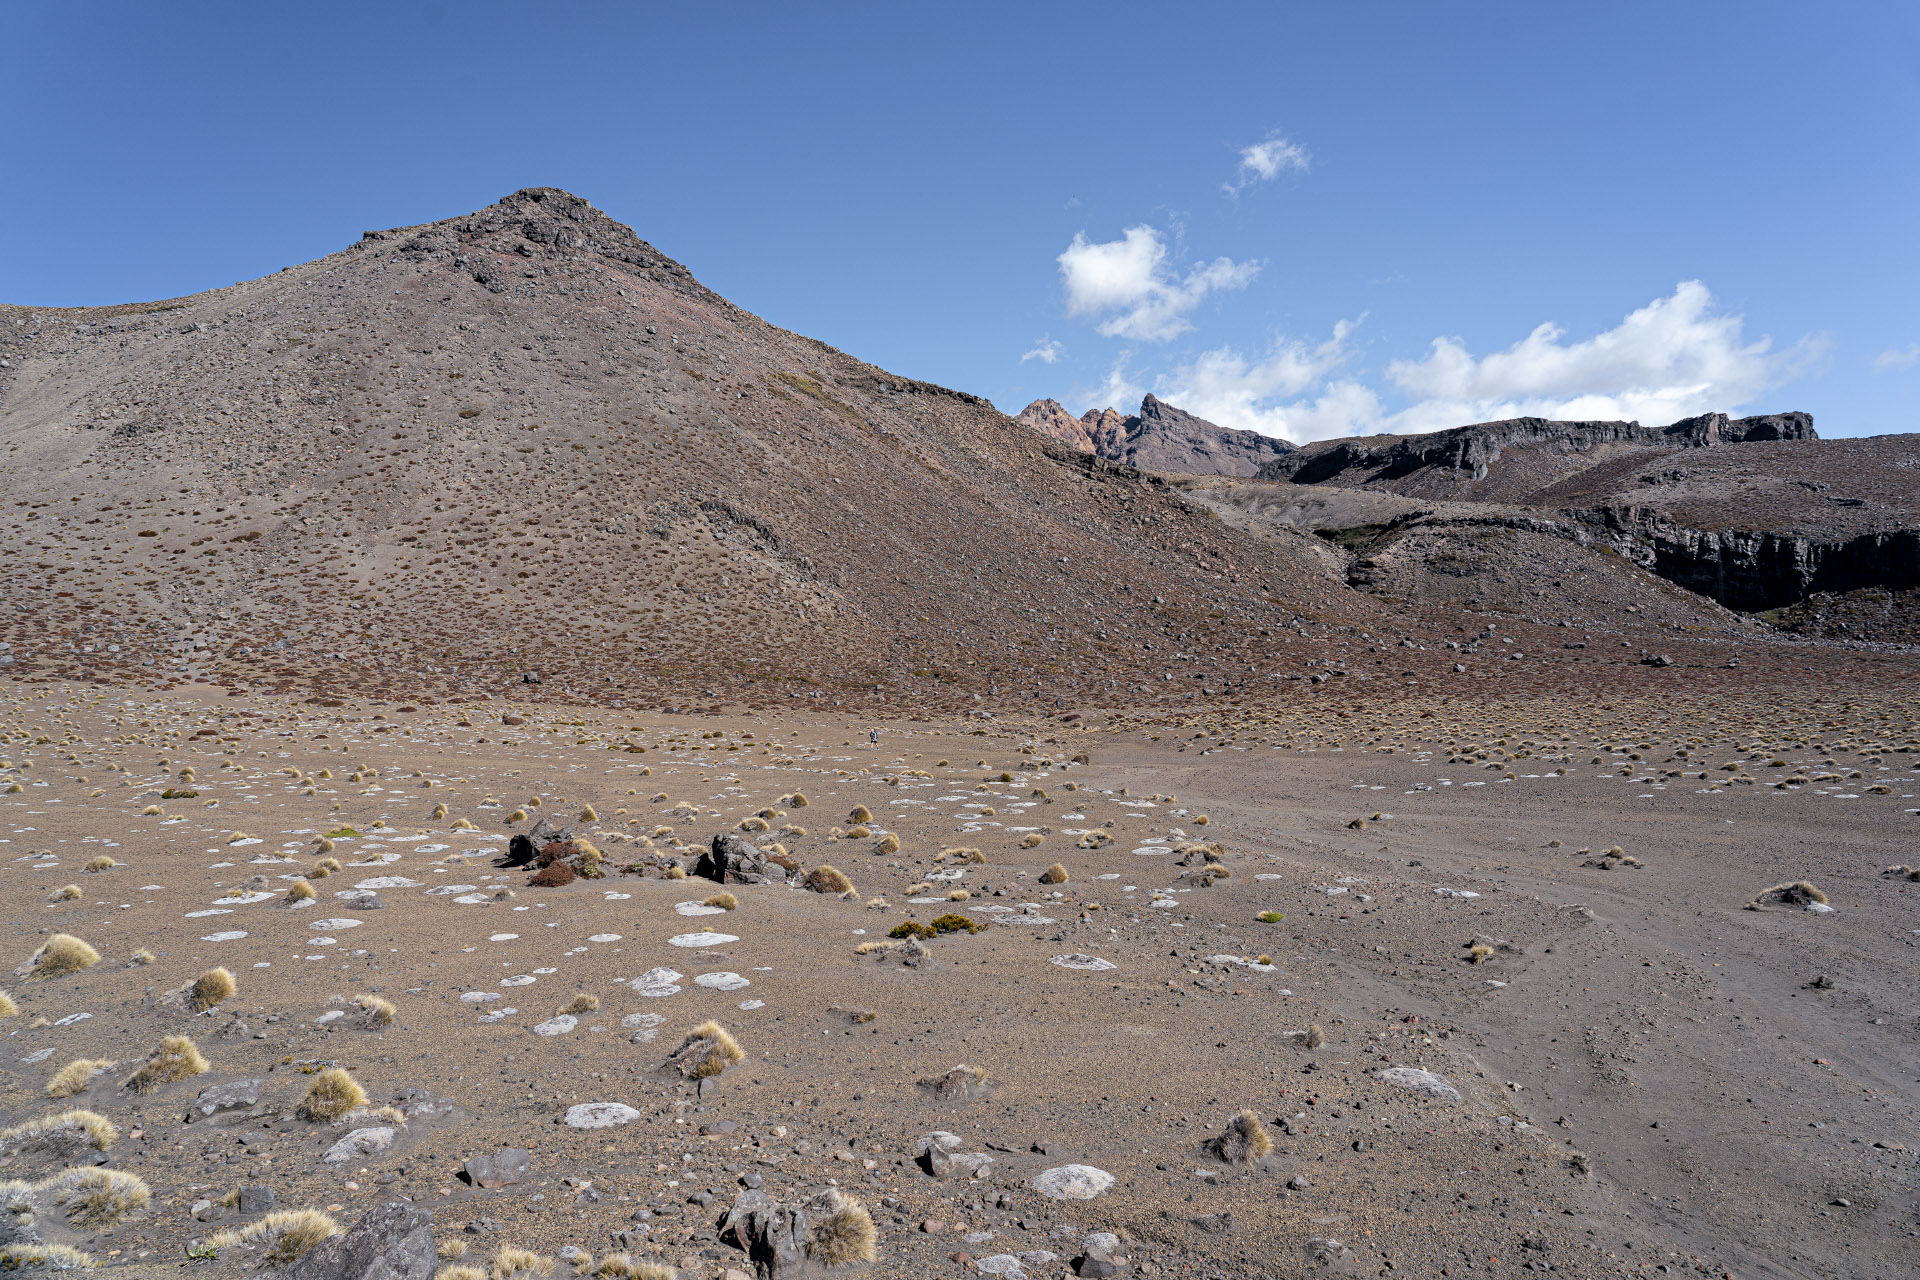 Saddle Cone on the north side of Mt Ruapehu